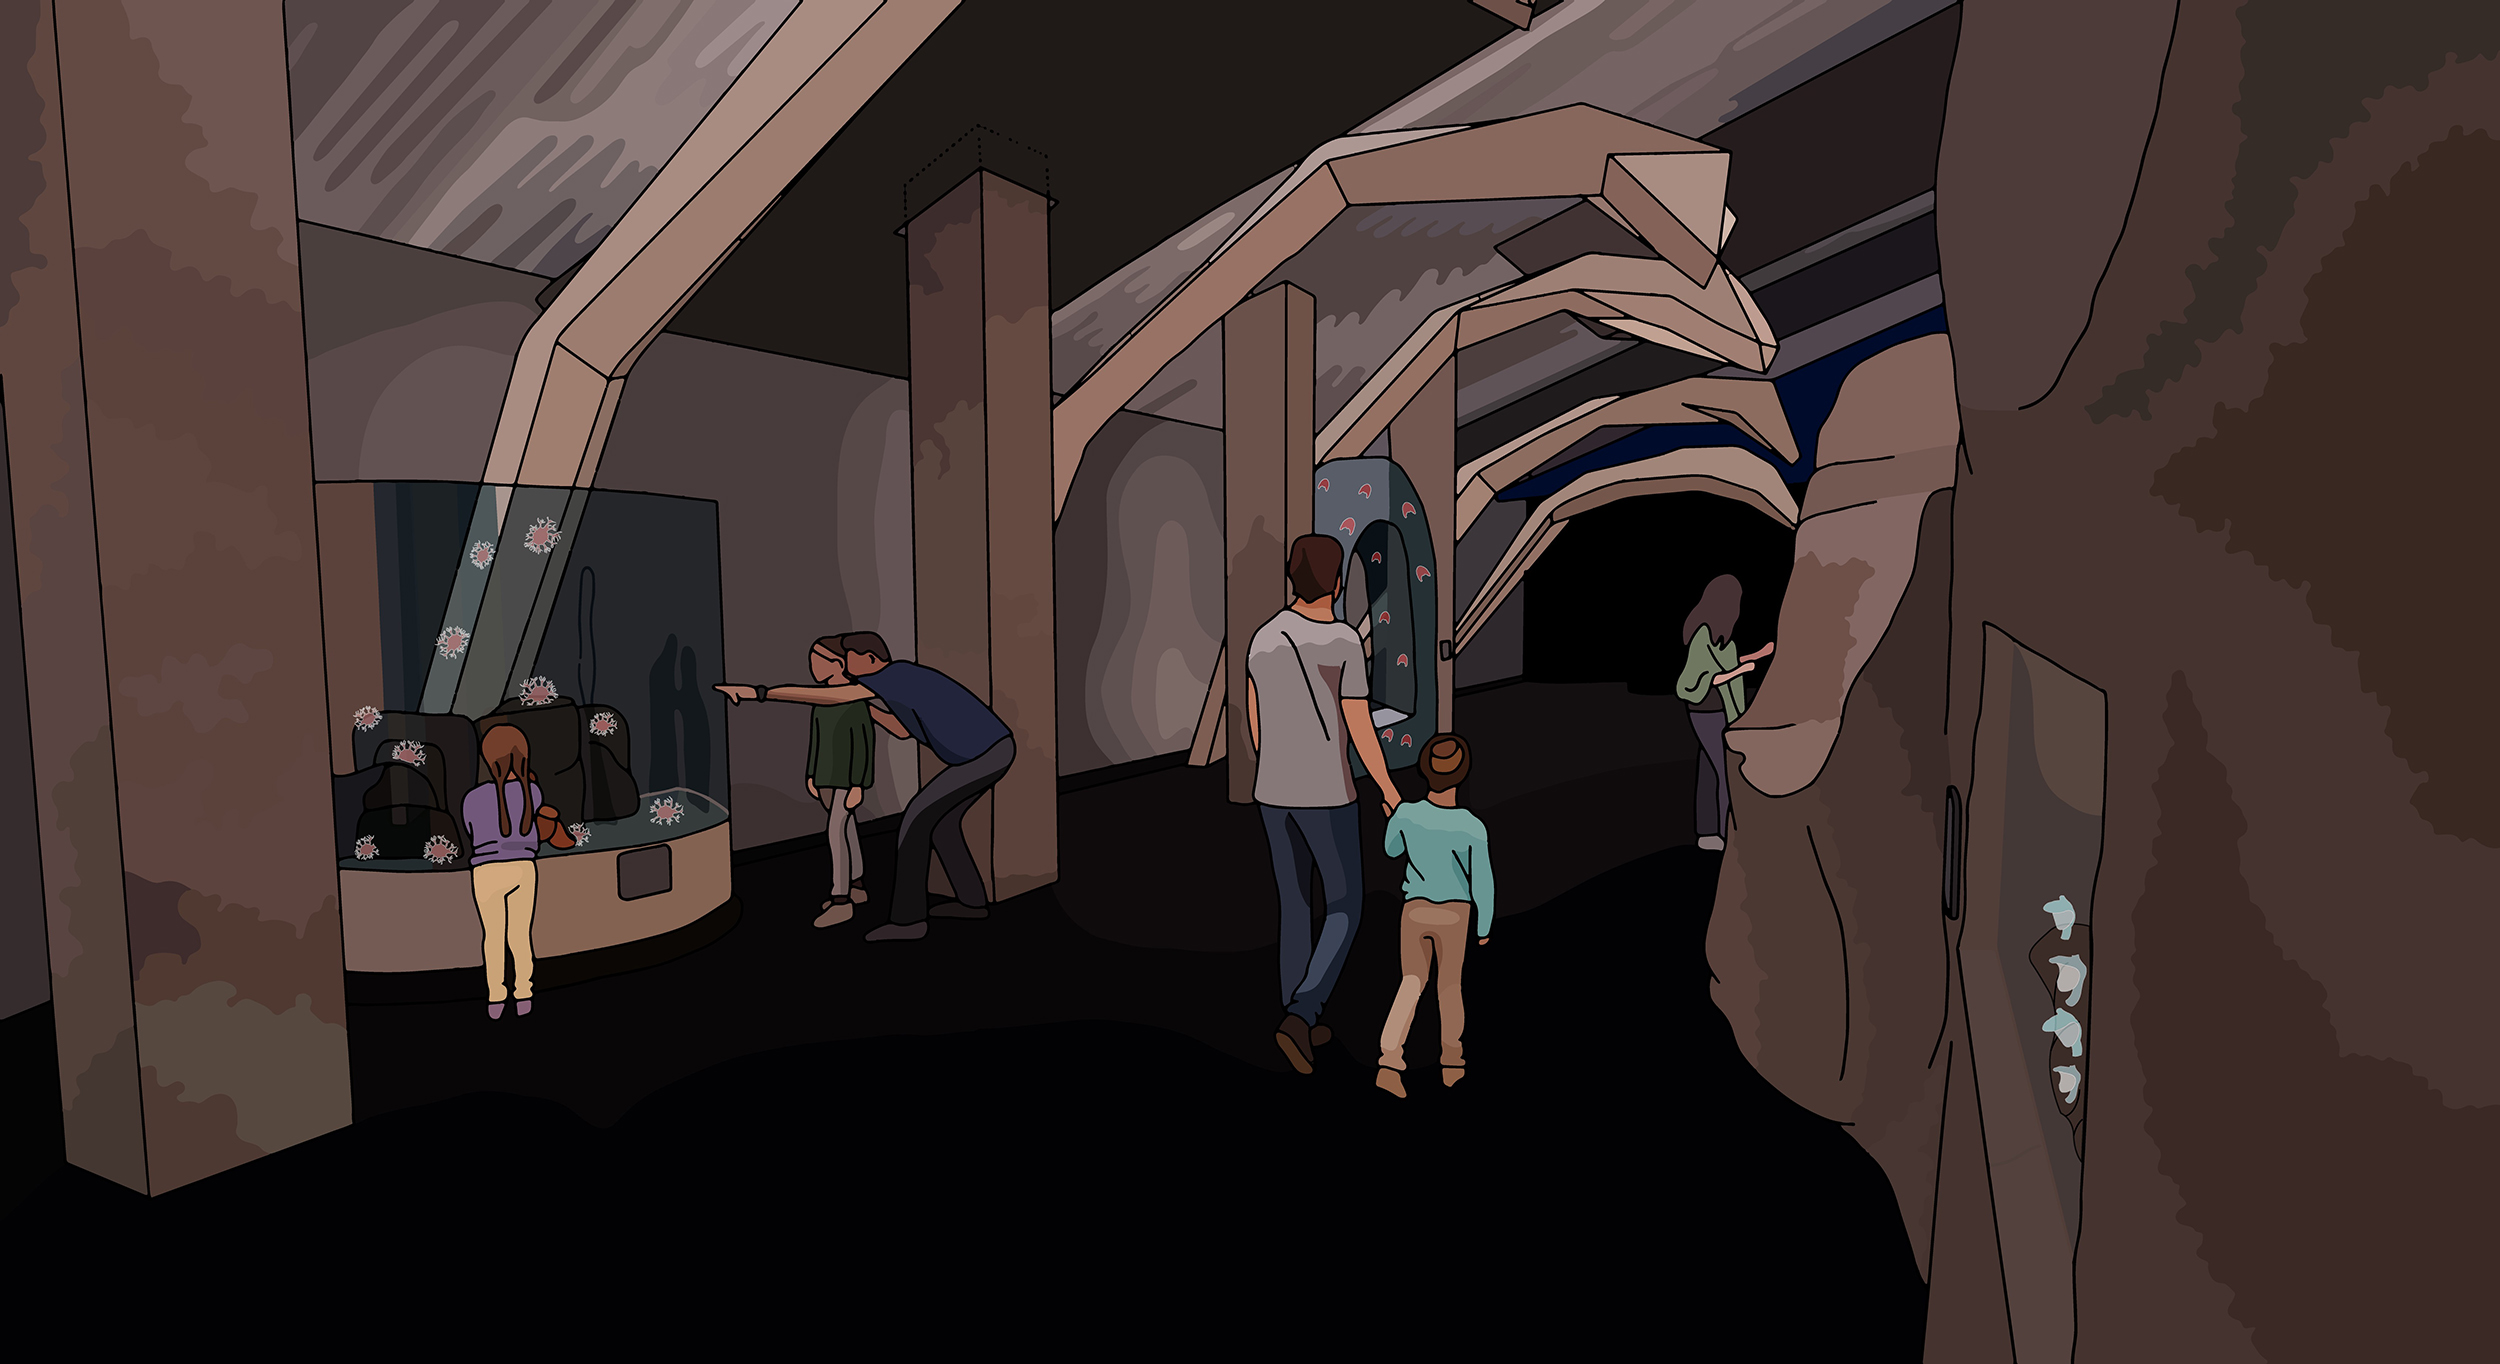 Render in illustrative style showing smaller tanks. Along the edge of the space is a model whale skeleton people can walk under. The space is brown and grey.